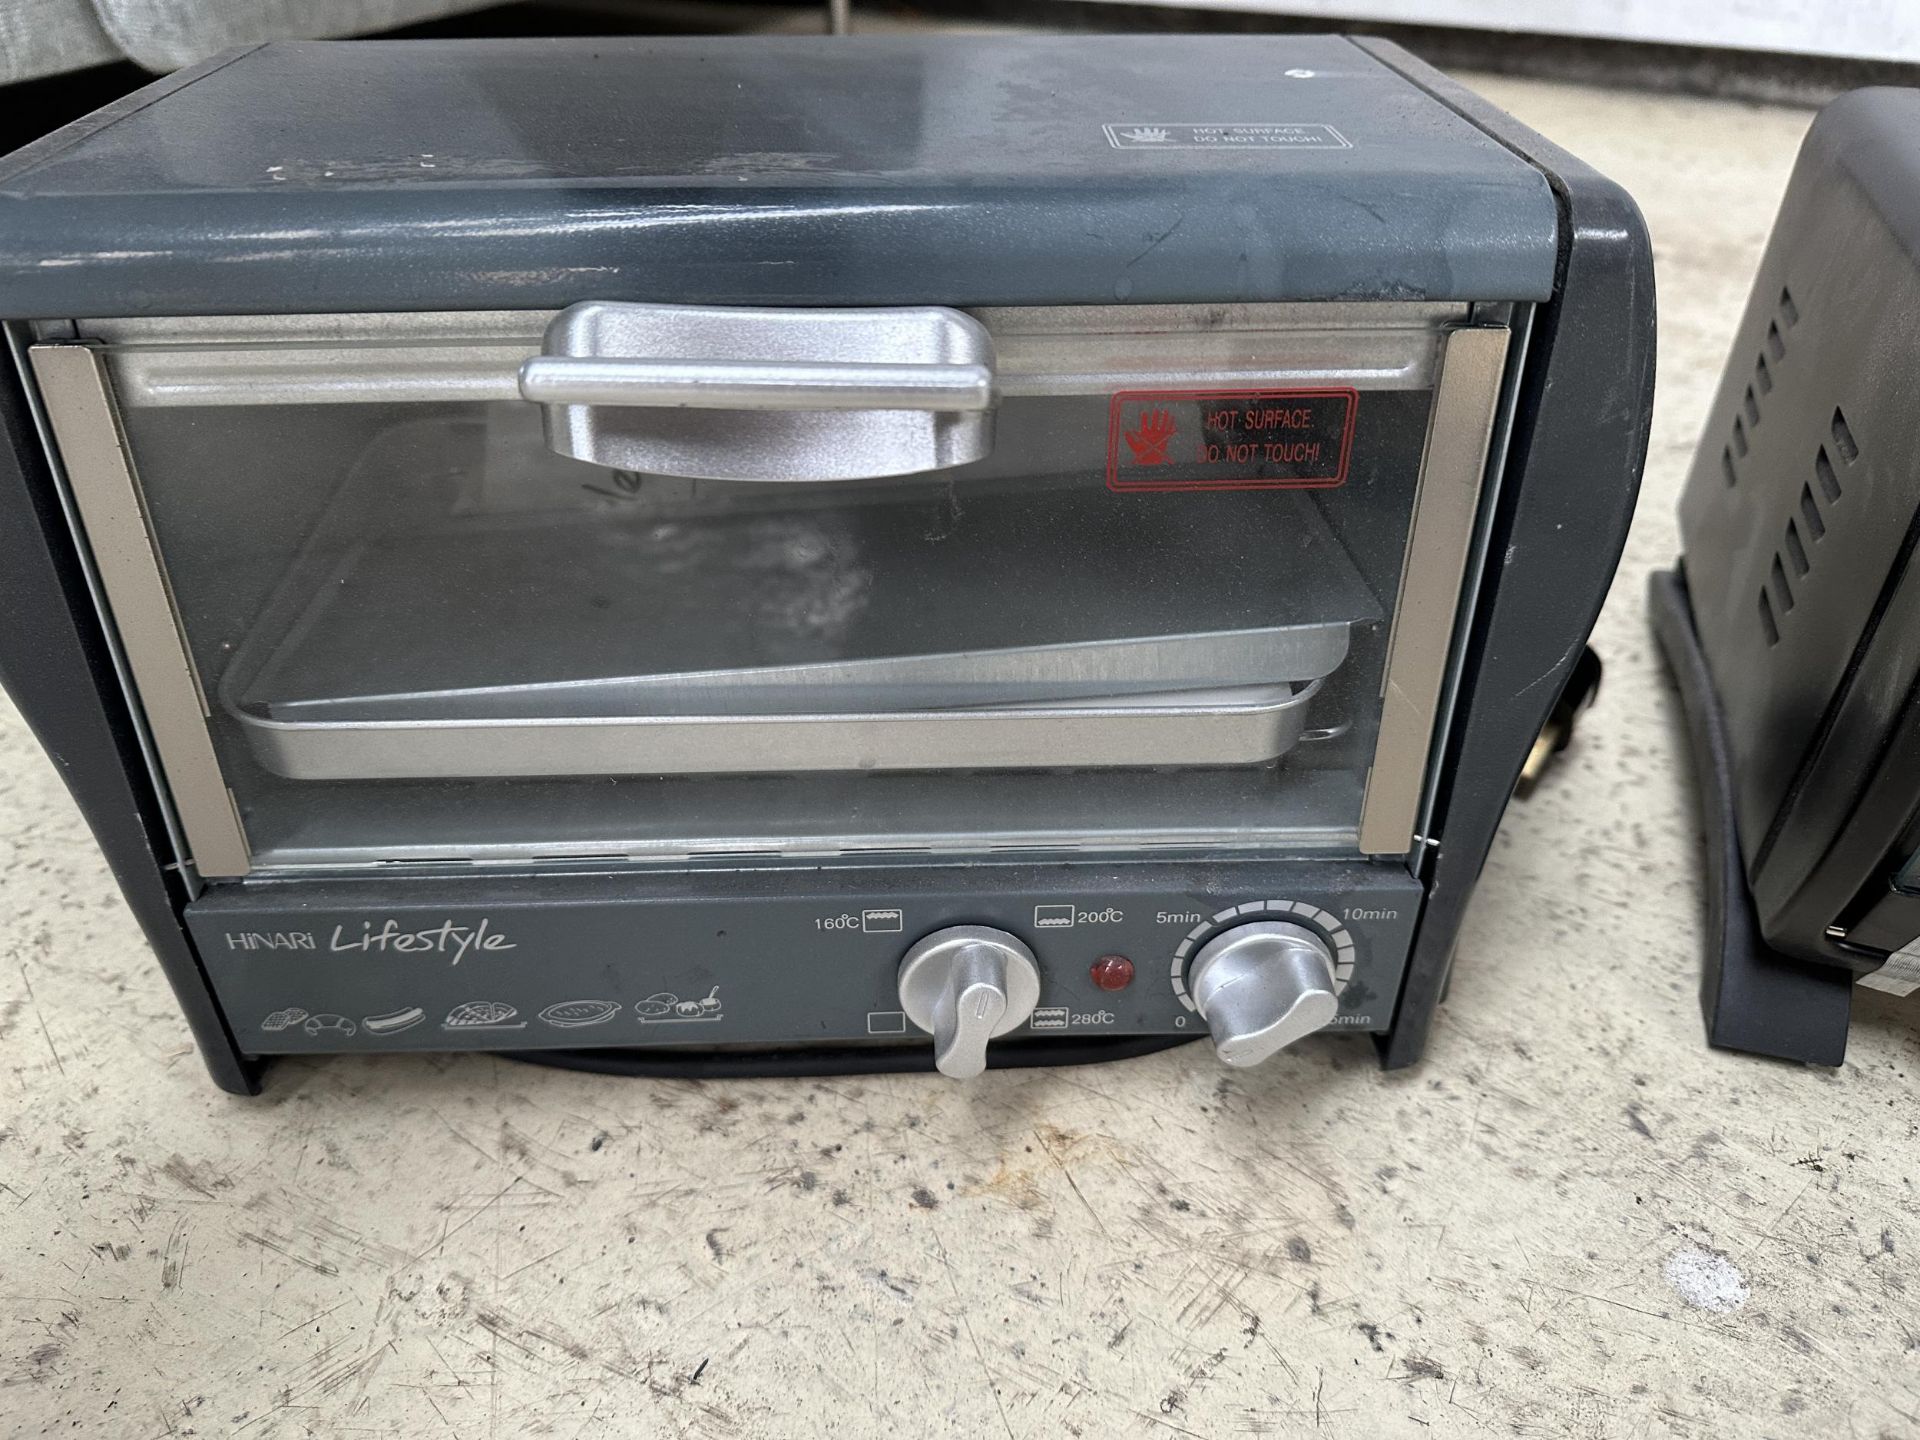 TWO COUNTER TOP MINI OVEN AND GRILLS - BELIEVED UNUSED - Image 3 of 4